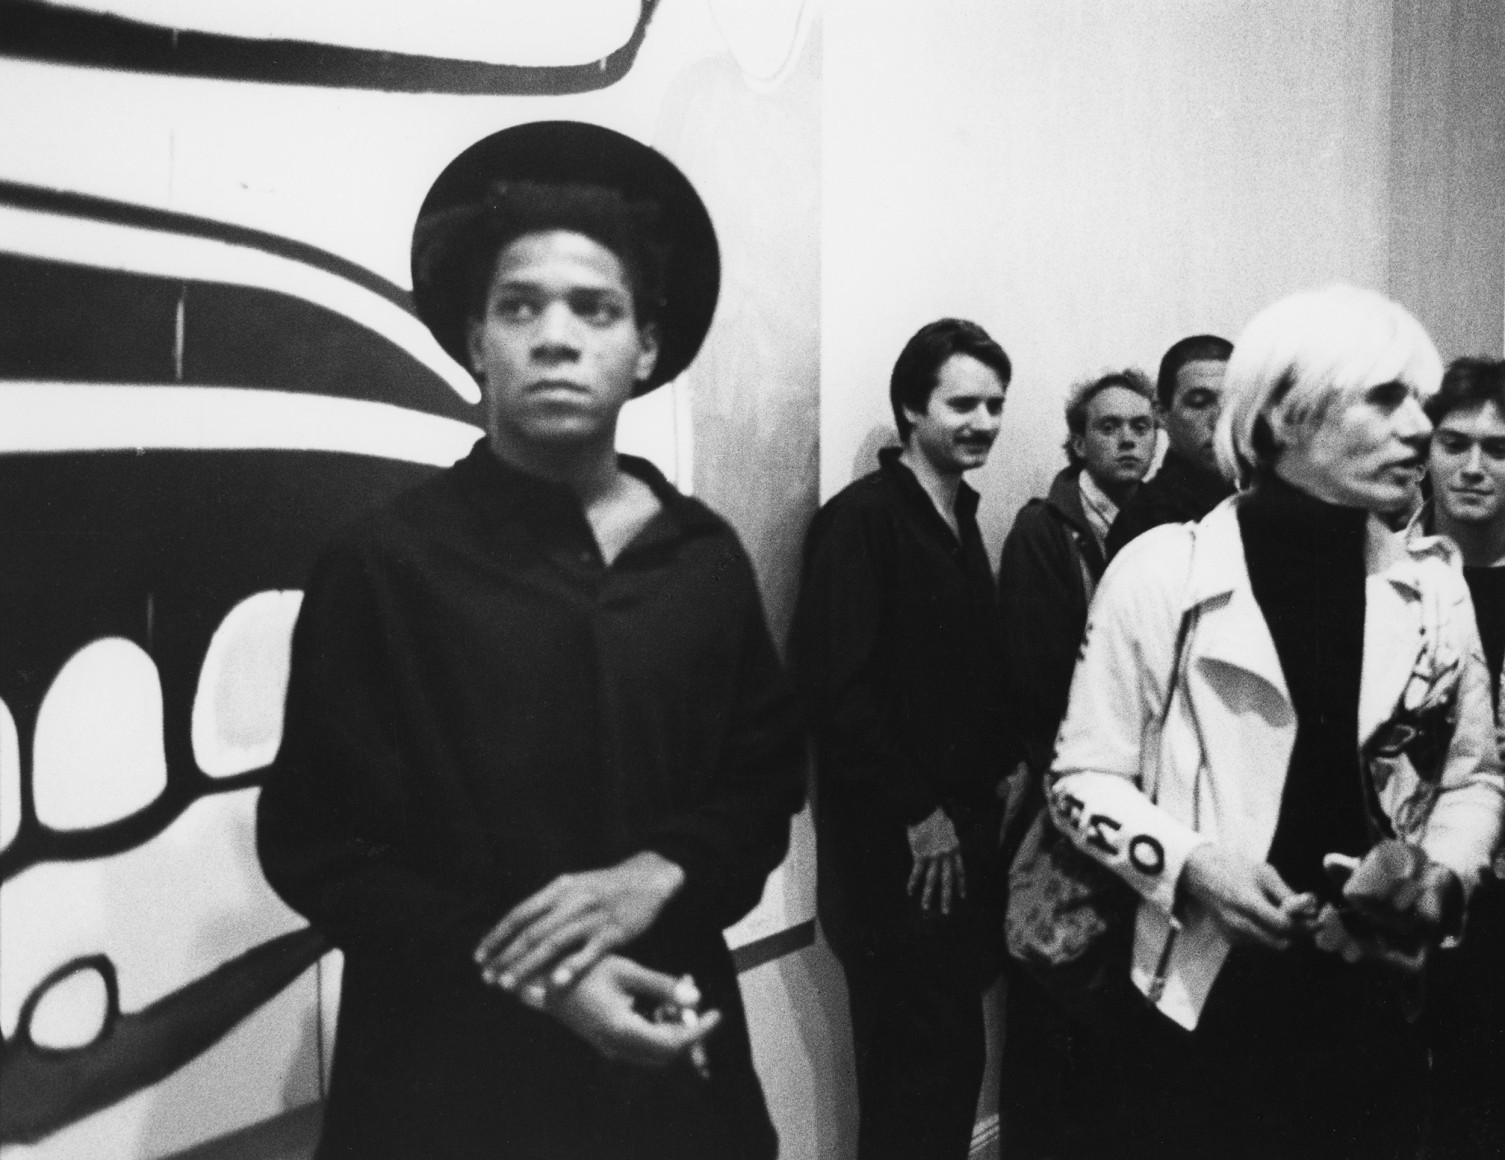 Coreen Simpson, Jean Michel Basquiat and Andy Warhol, NYC, 1985